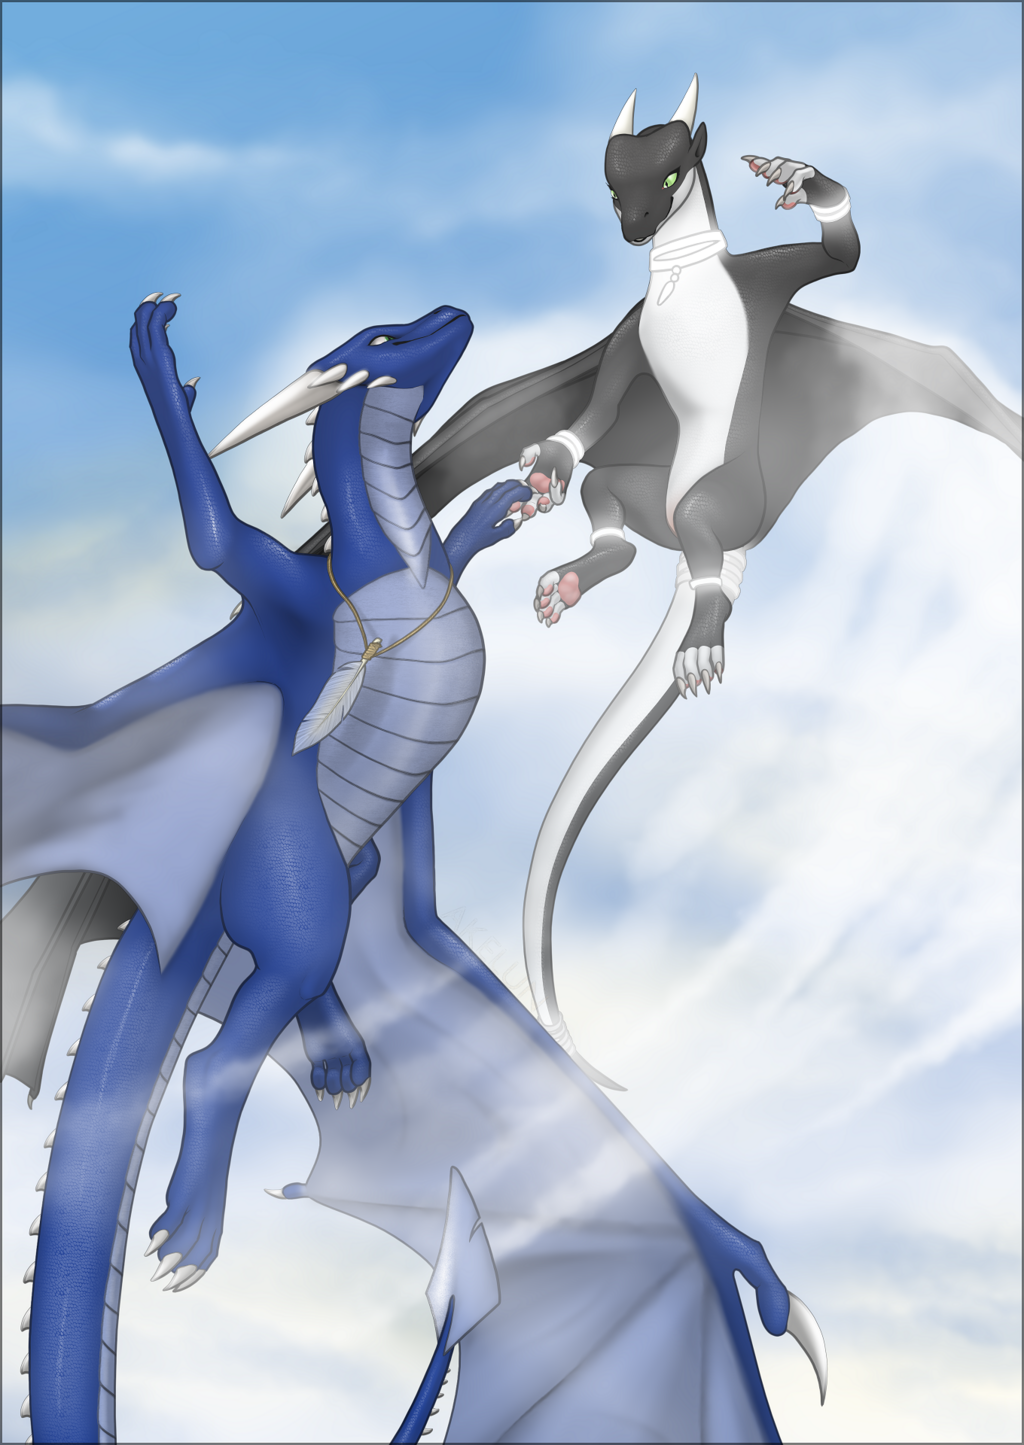 Most recent image: Dancing above the clouds [Commission]